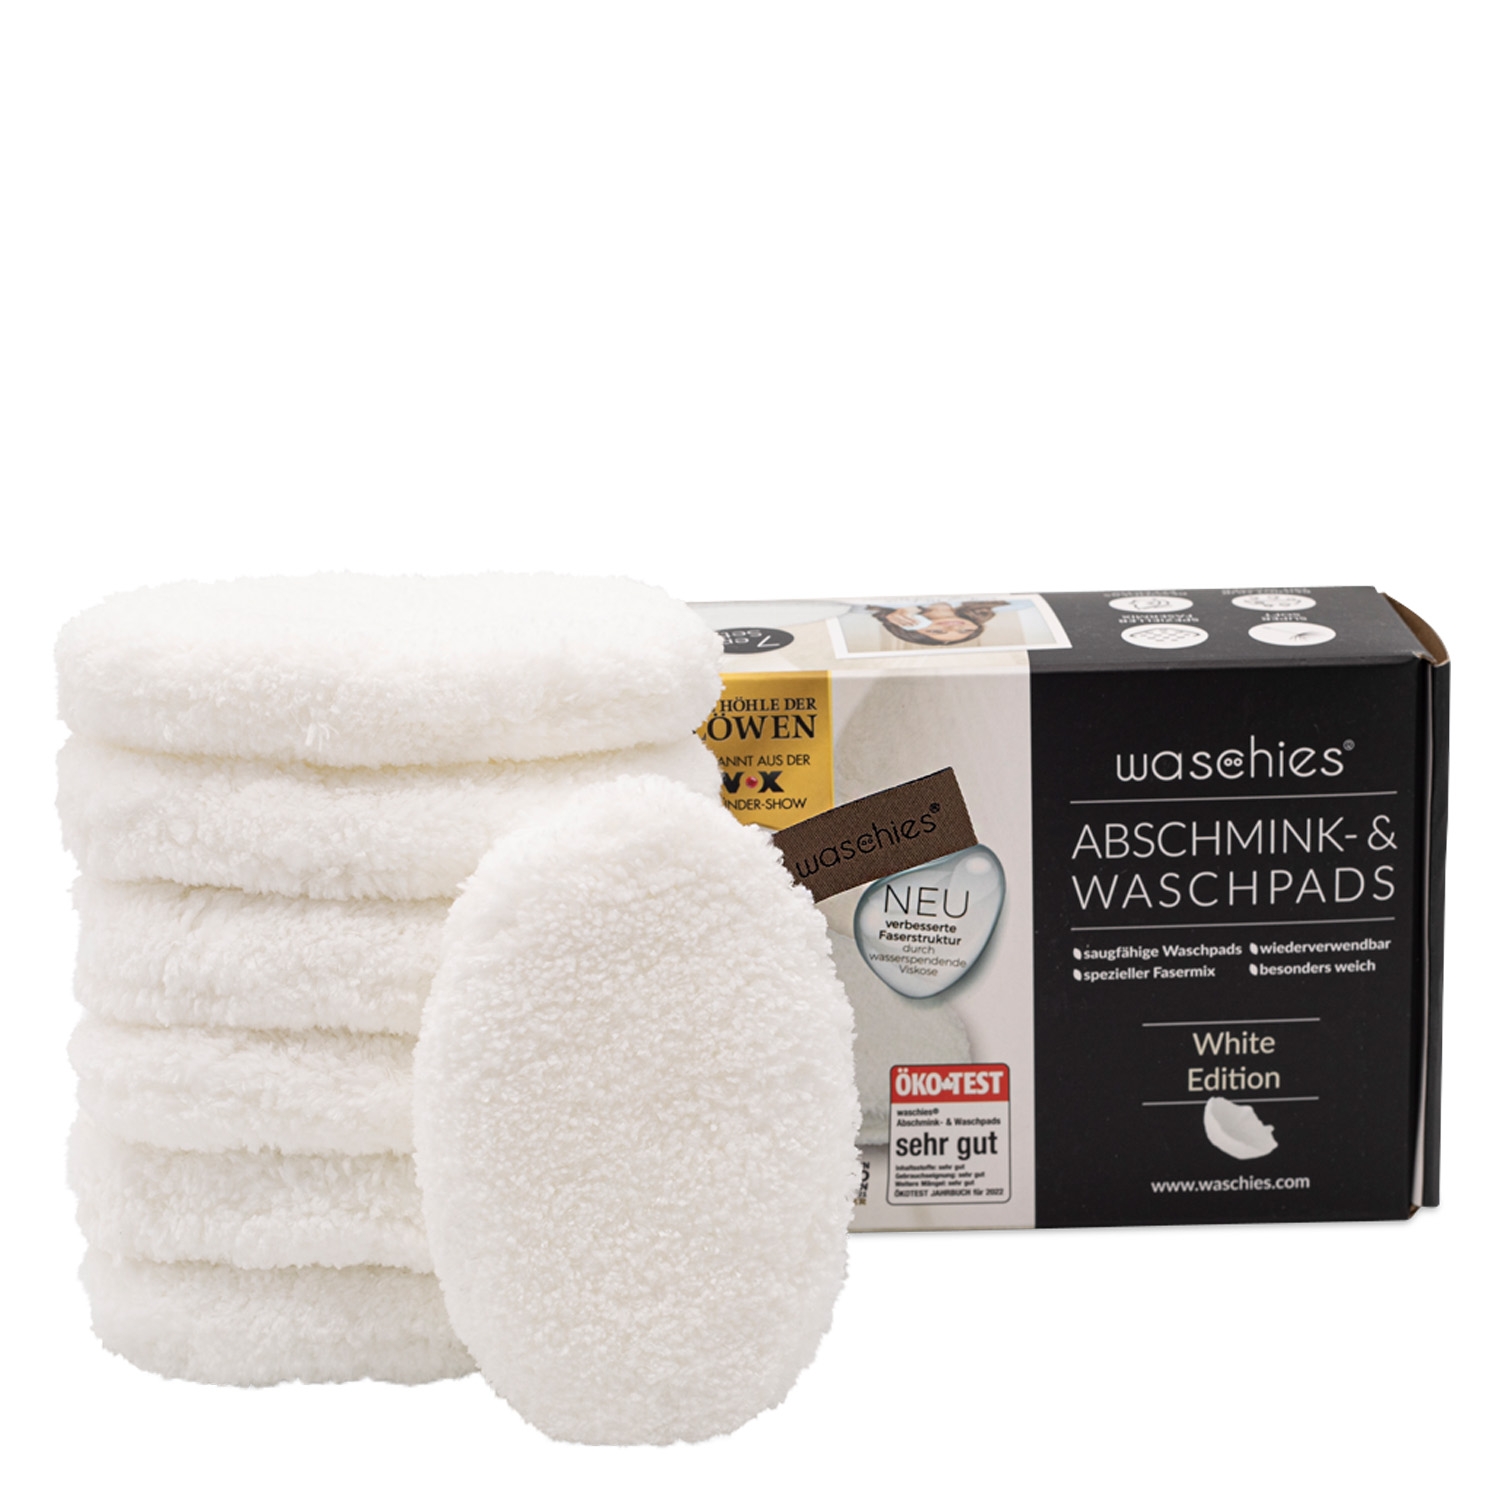 Product image from Waschies Faceline - Abschminkpads & Waschpads Weiss Classic-Edition